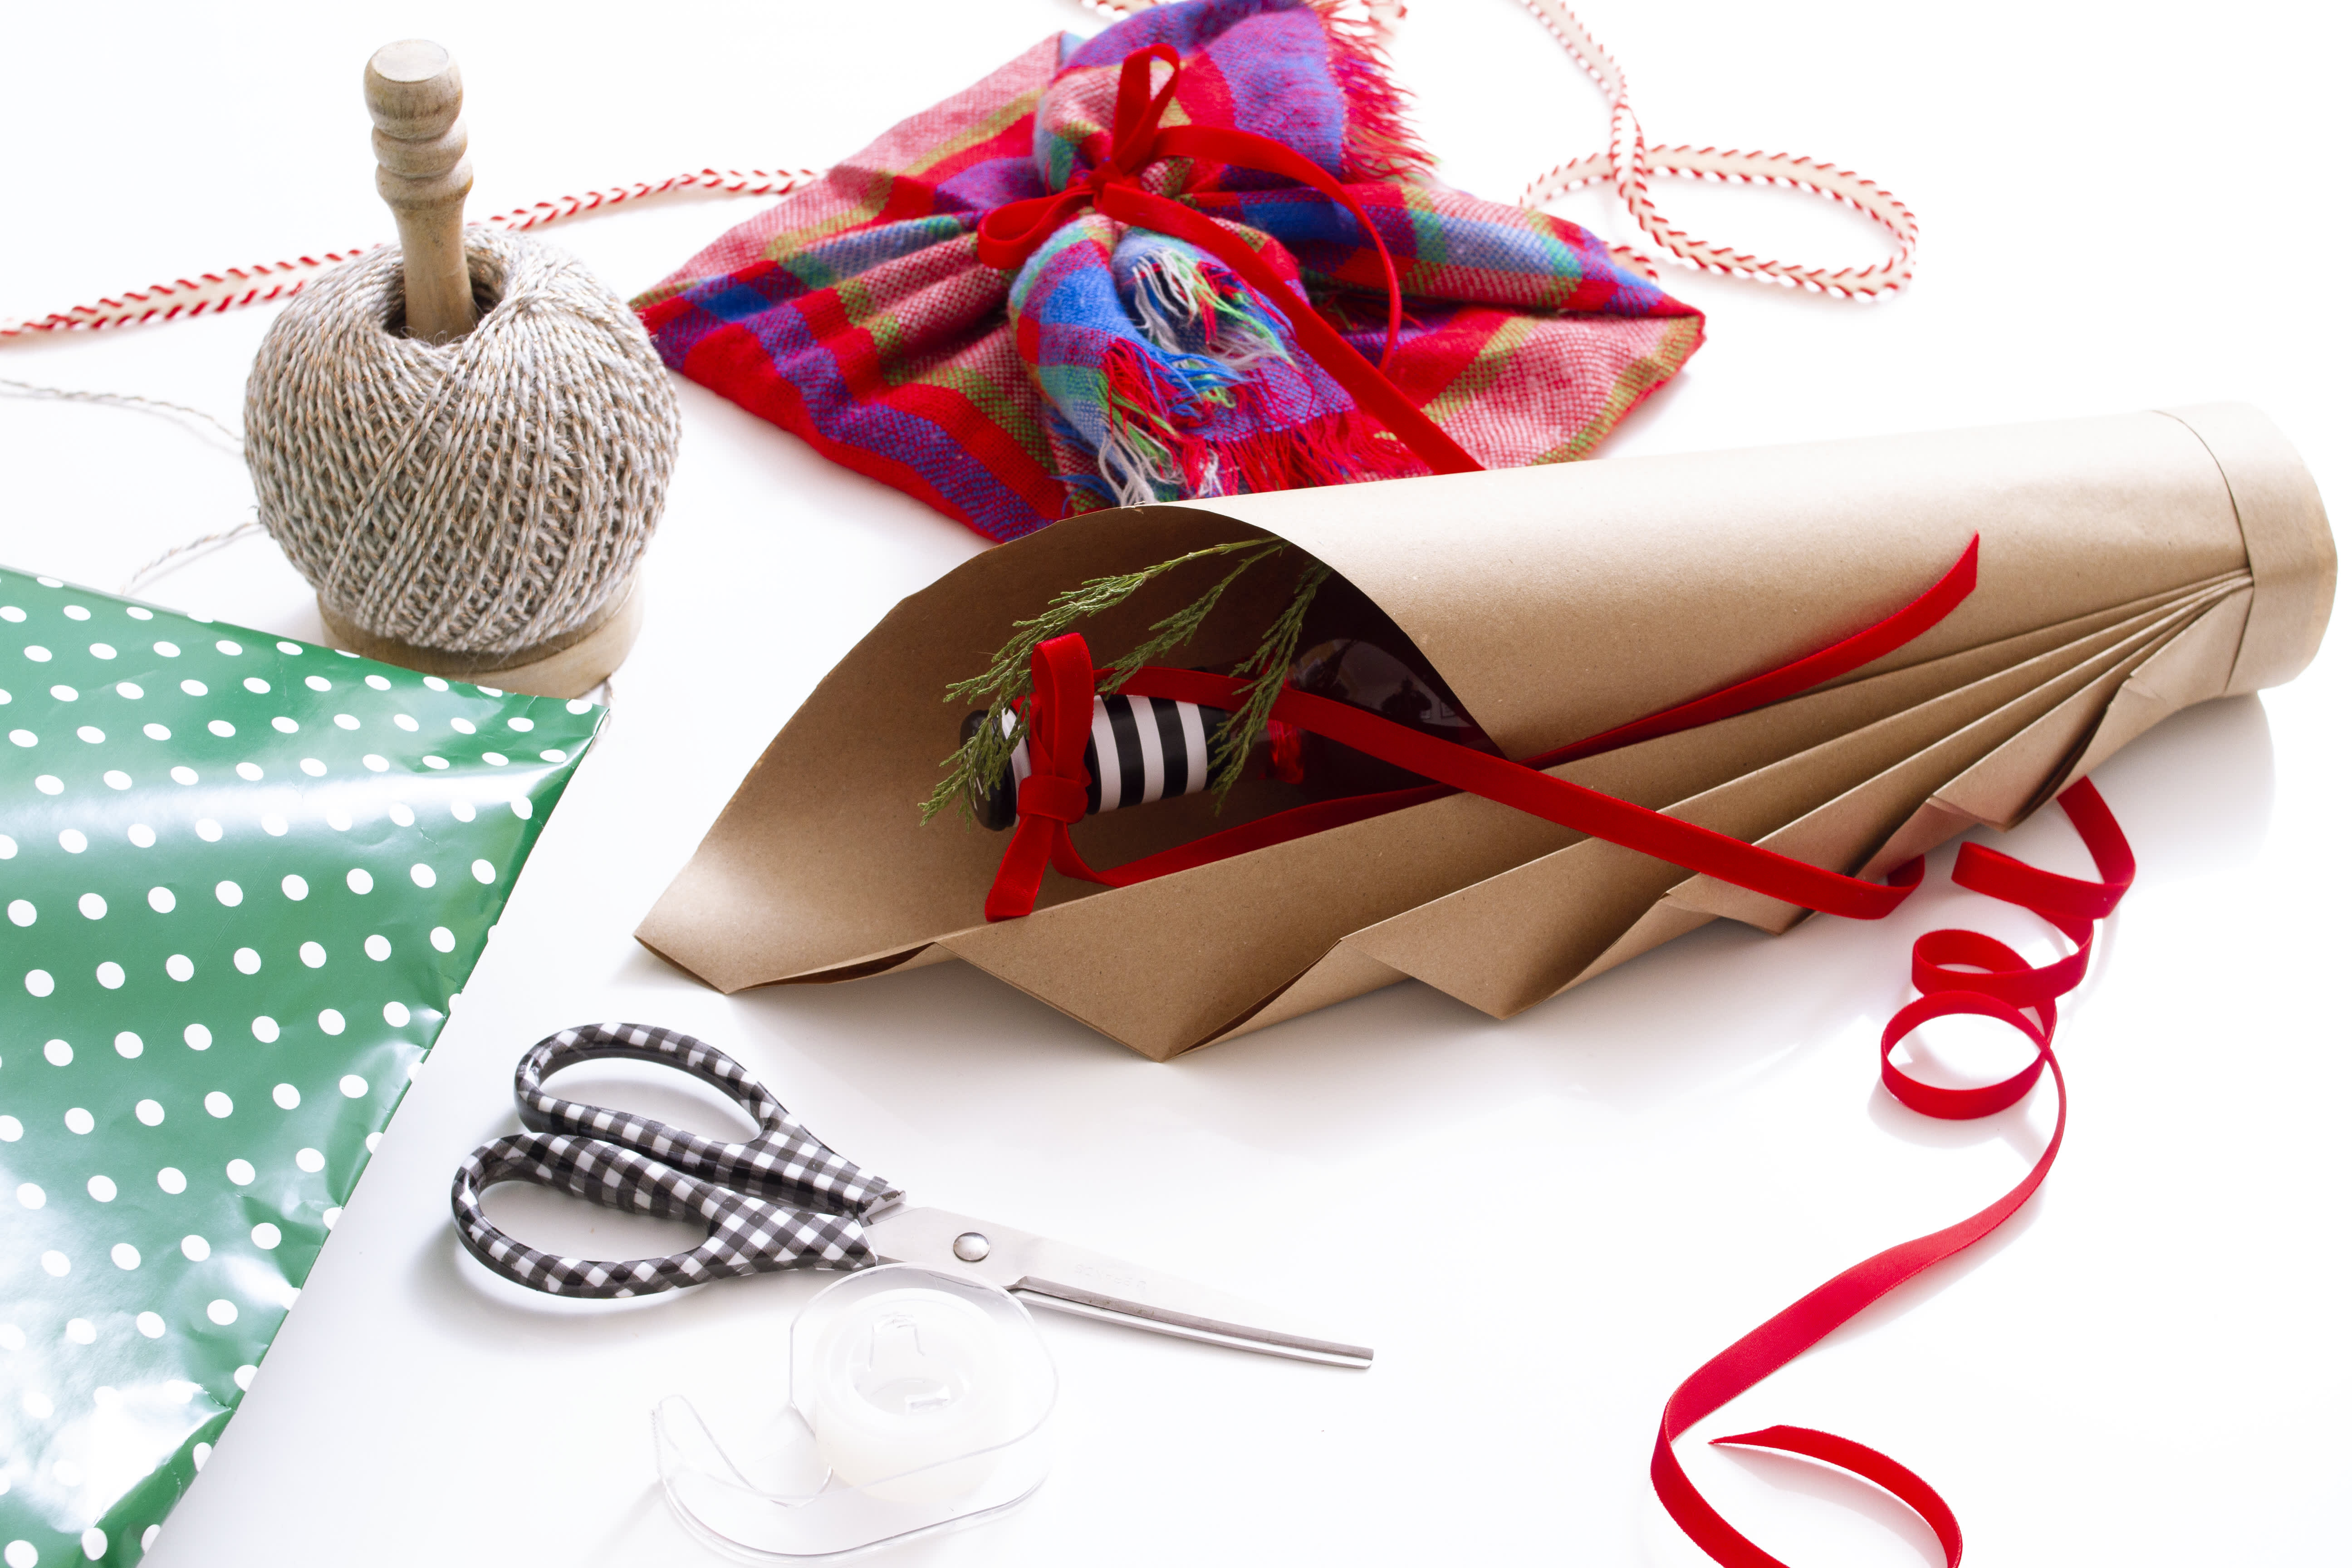 How To Use Our Products Why and How To Use Gift Wrapping Tissue Paper